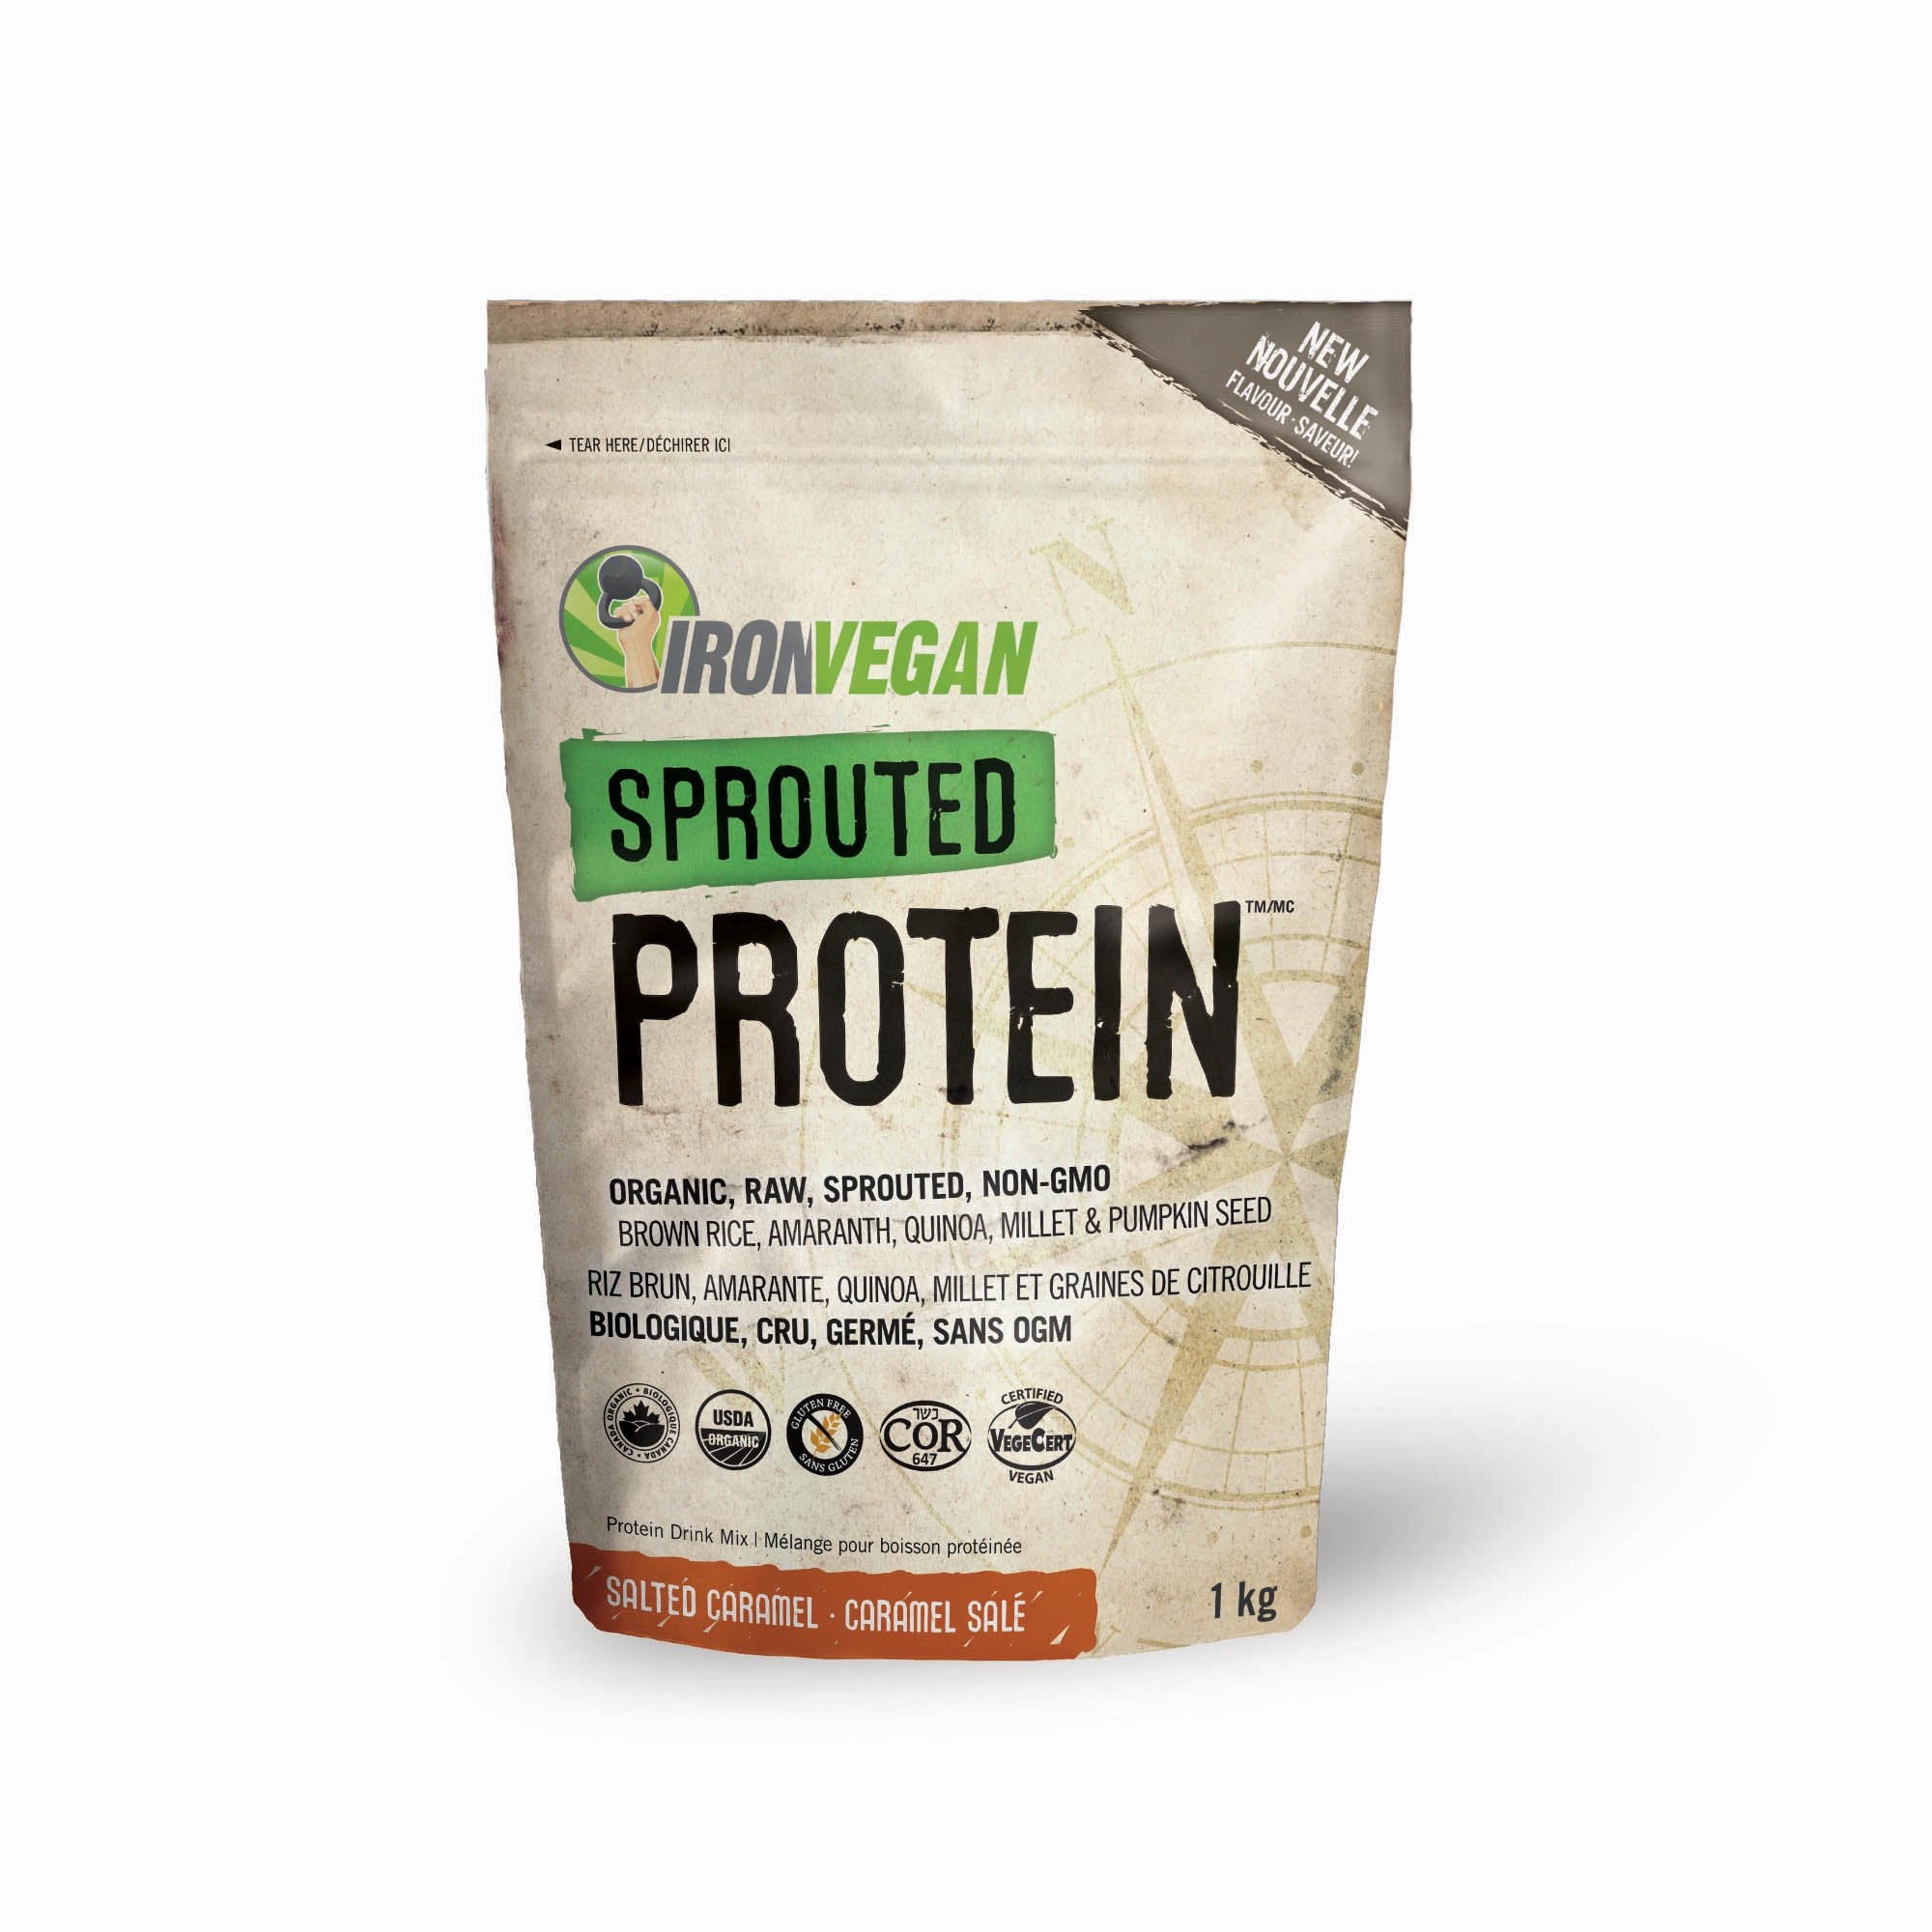 Iron Vegan Sprouted Protein Salted Caramel 1 Kg